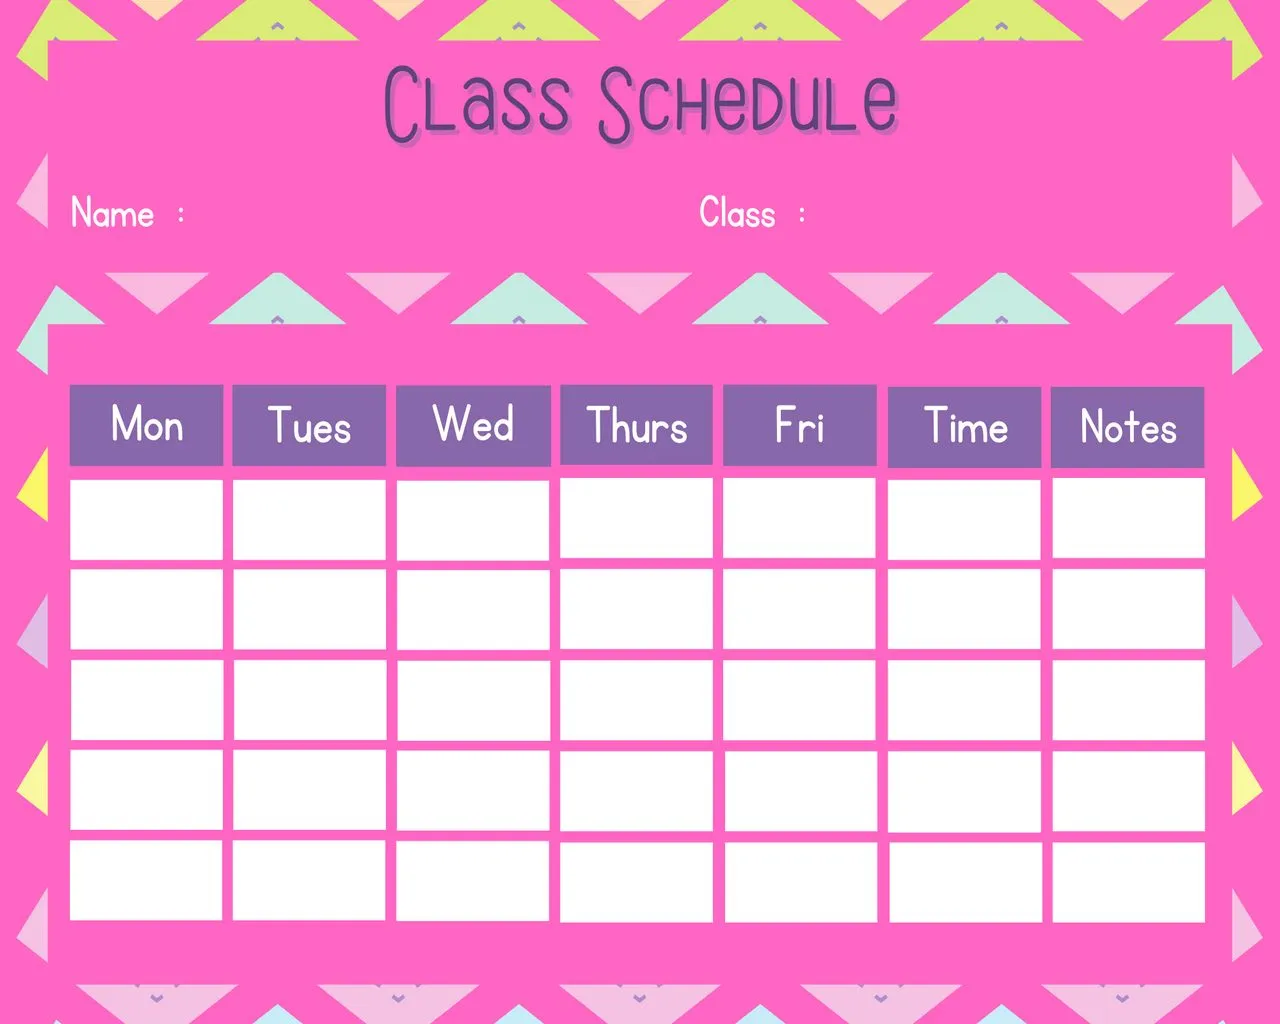 Class Schedule Template Printable 01